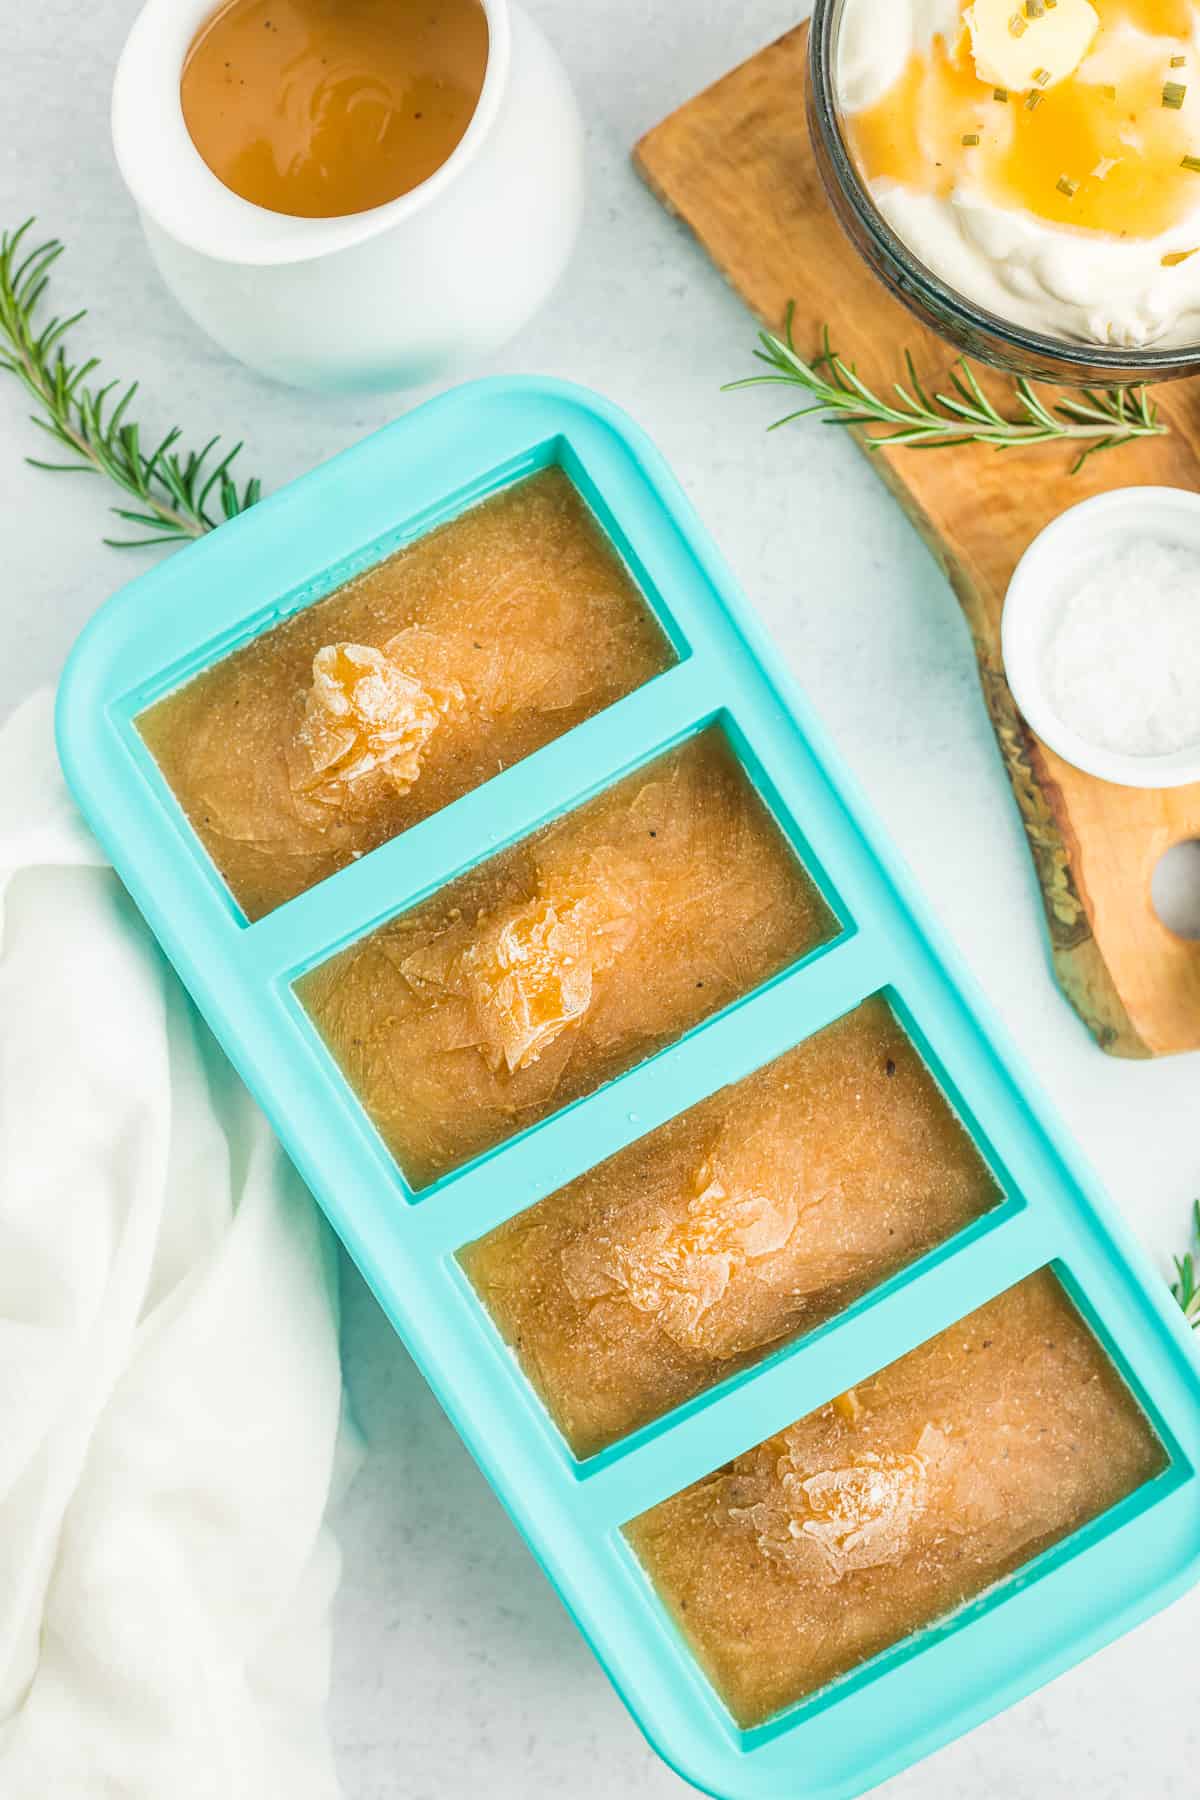 a teal freezer tray with frozen gravy.